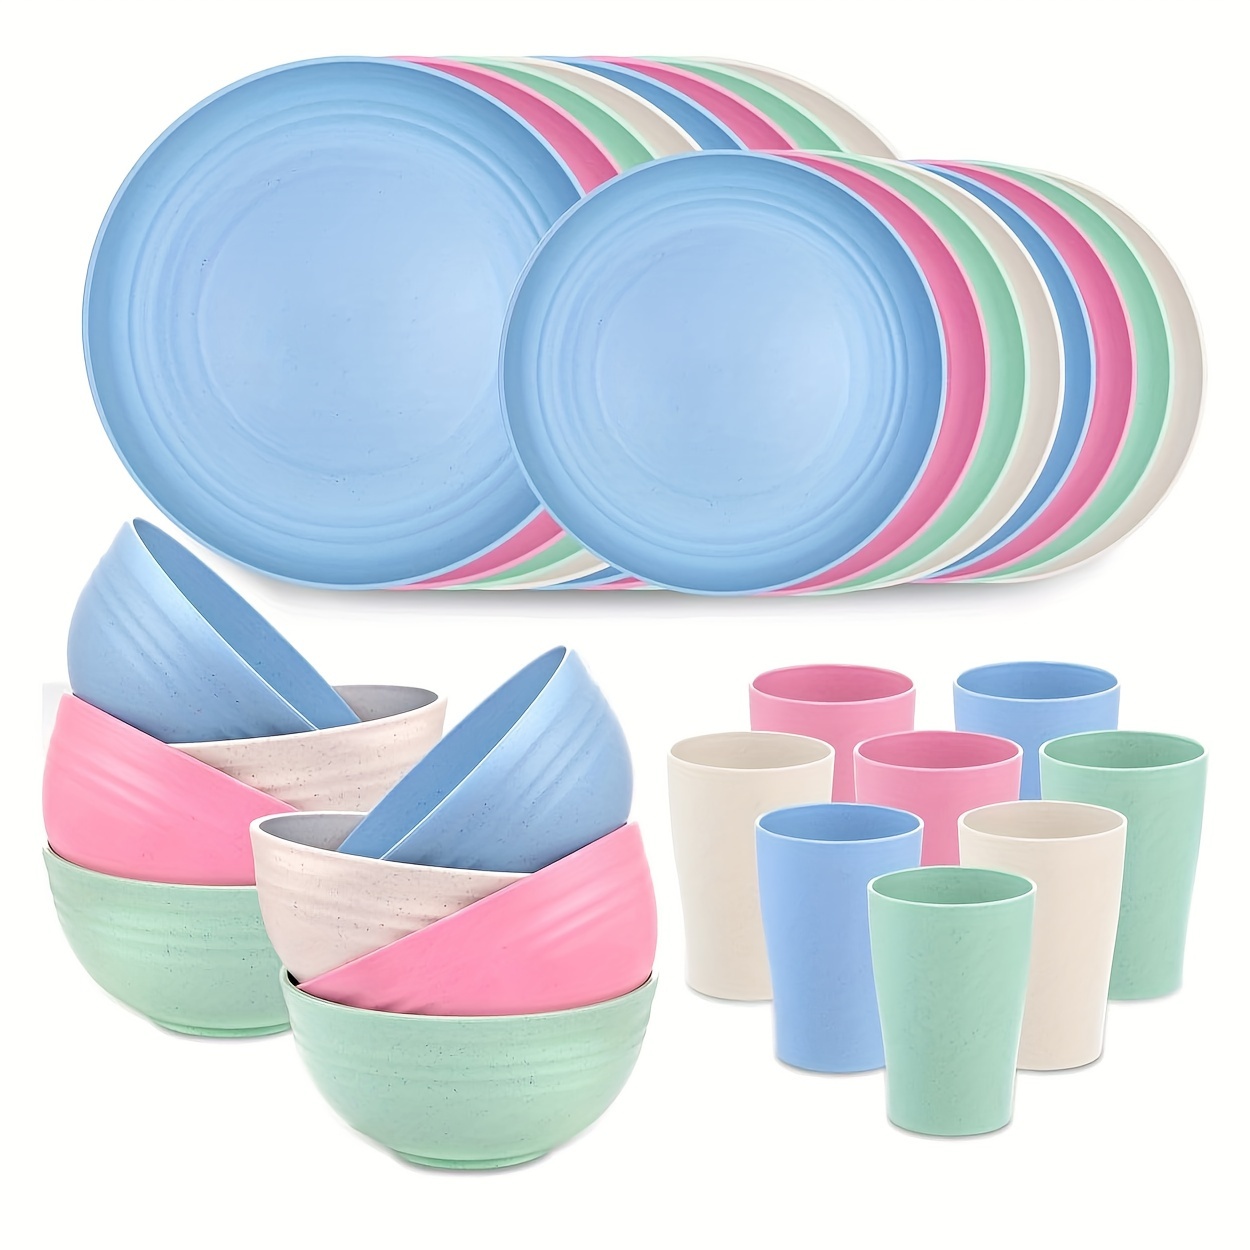 

32pcs Wheat Straw Dinnerware, Microwave Dishwasher Safe, Unbreakable Light Weight Plates Service For 8, Reusable Tableware Set, Multicolor Set Include 16pcs Plates, 8pcs Bowls, 8pcs Cups